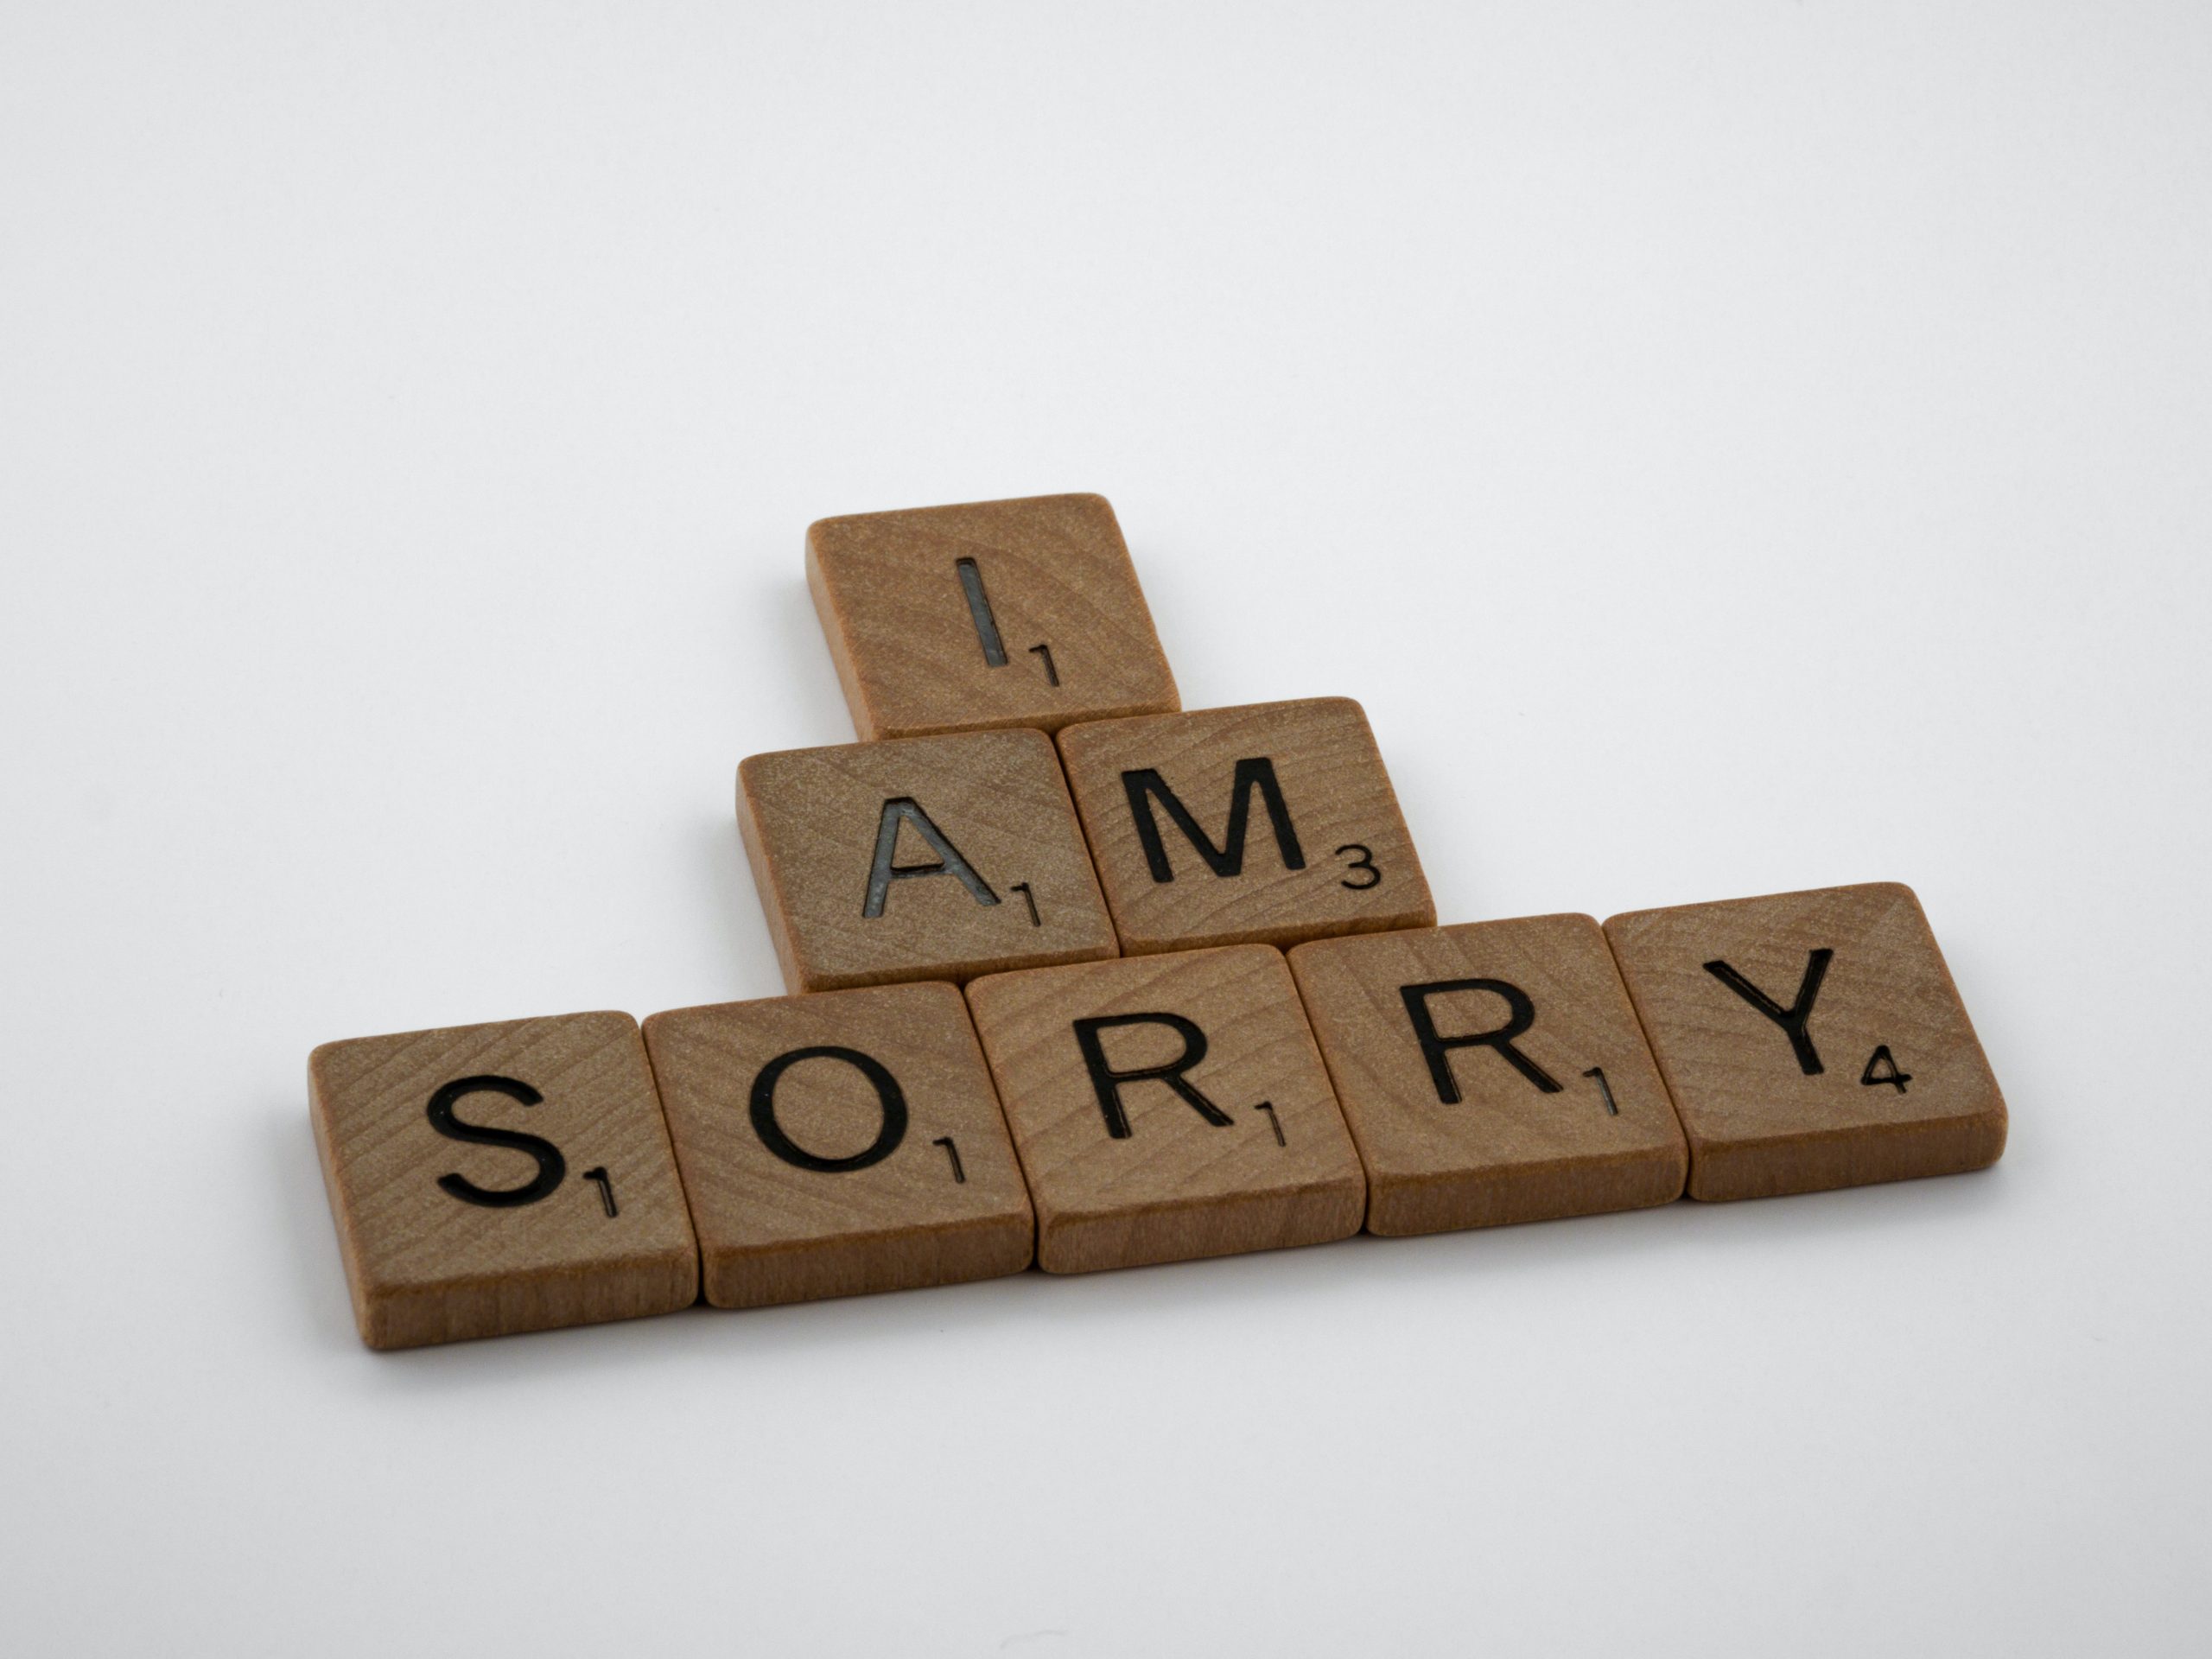 "I am sorry" game pieces for a No-Fault Divorce in Wisconsin